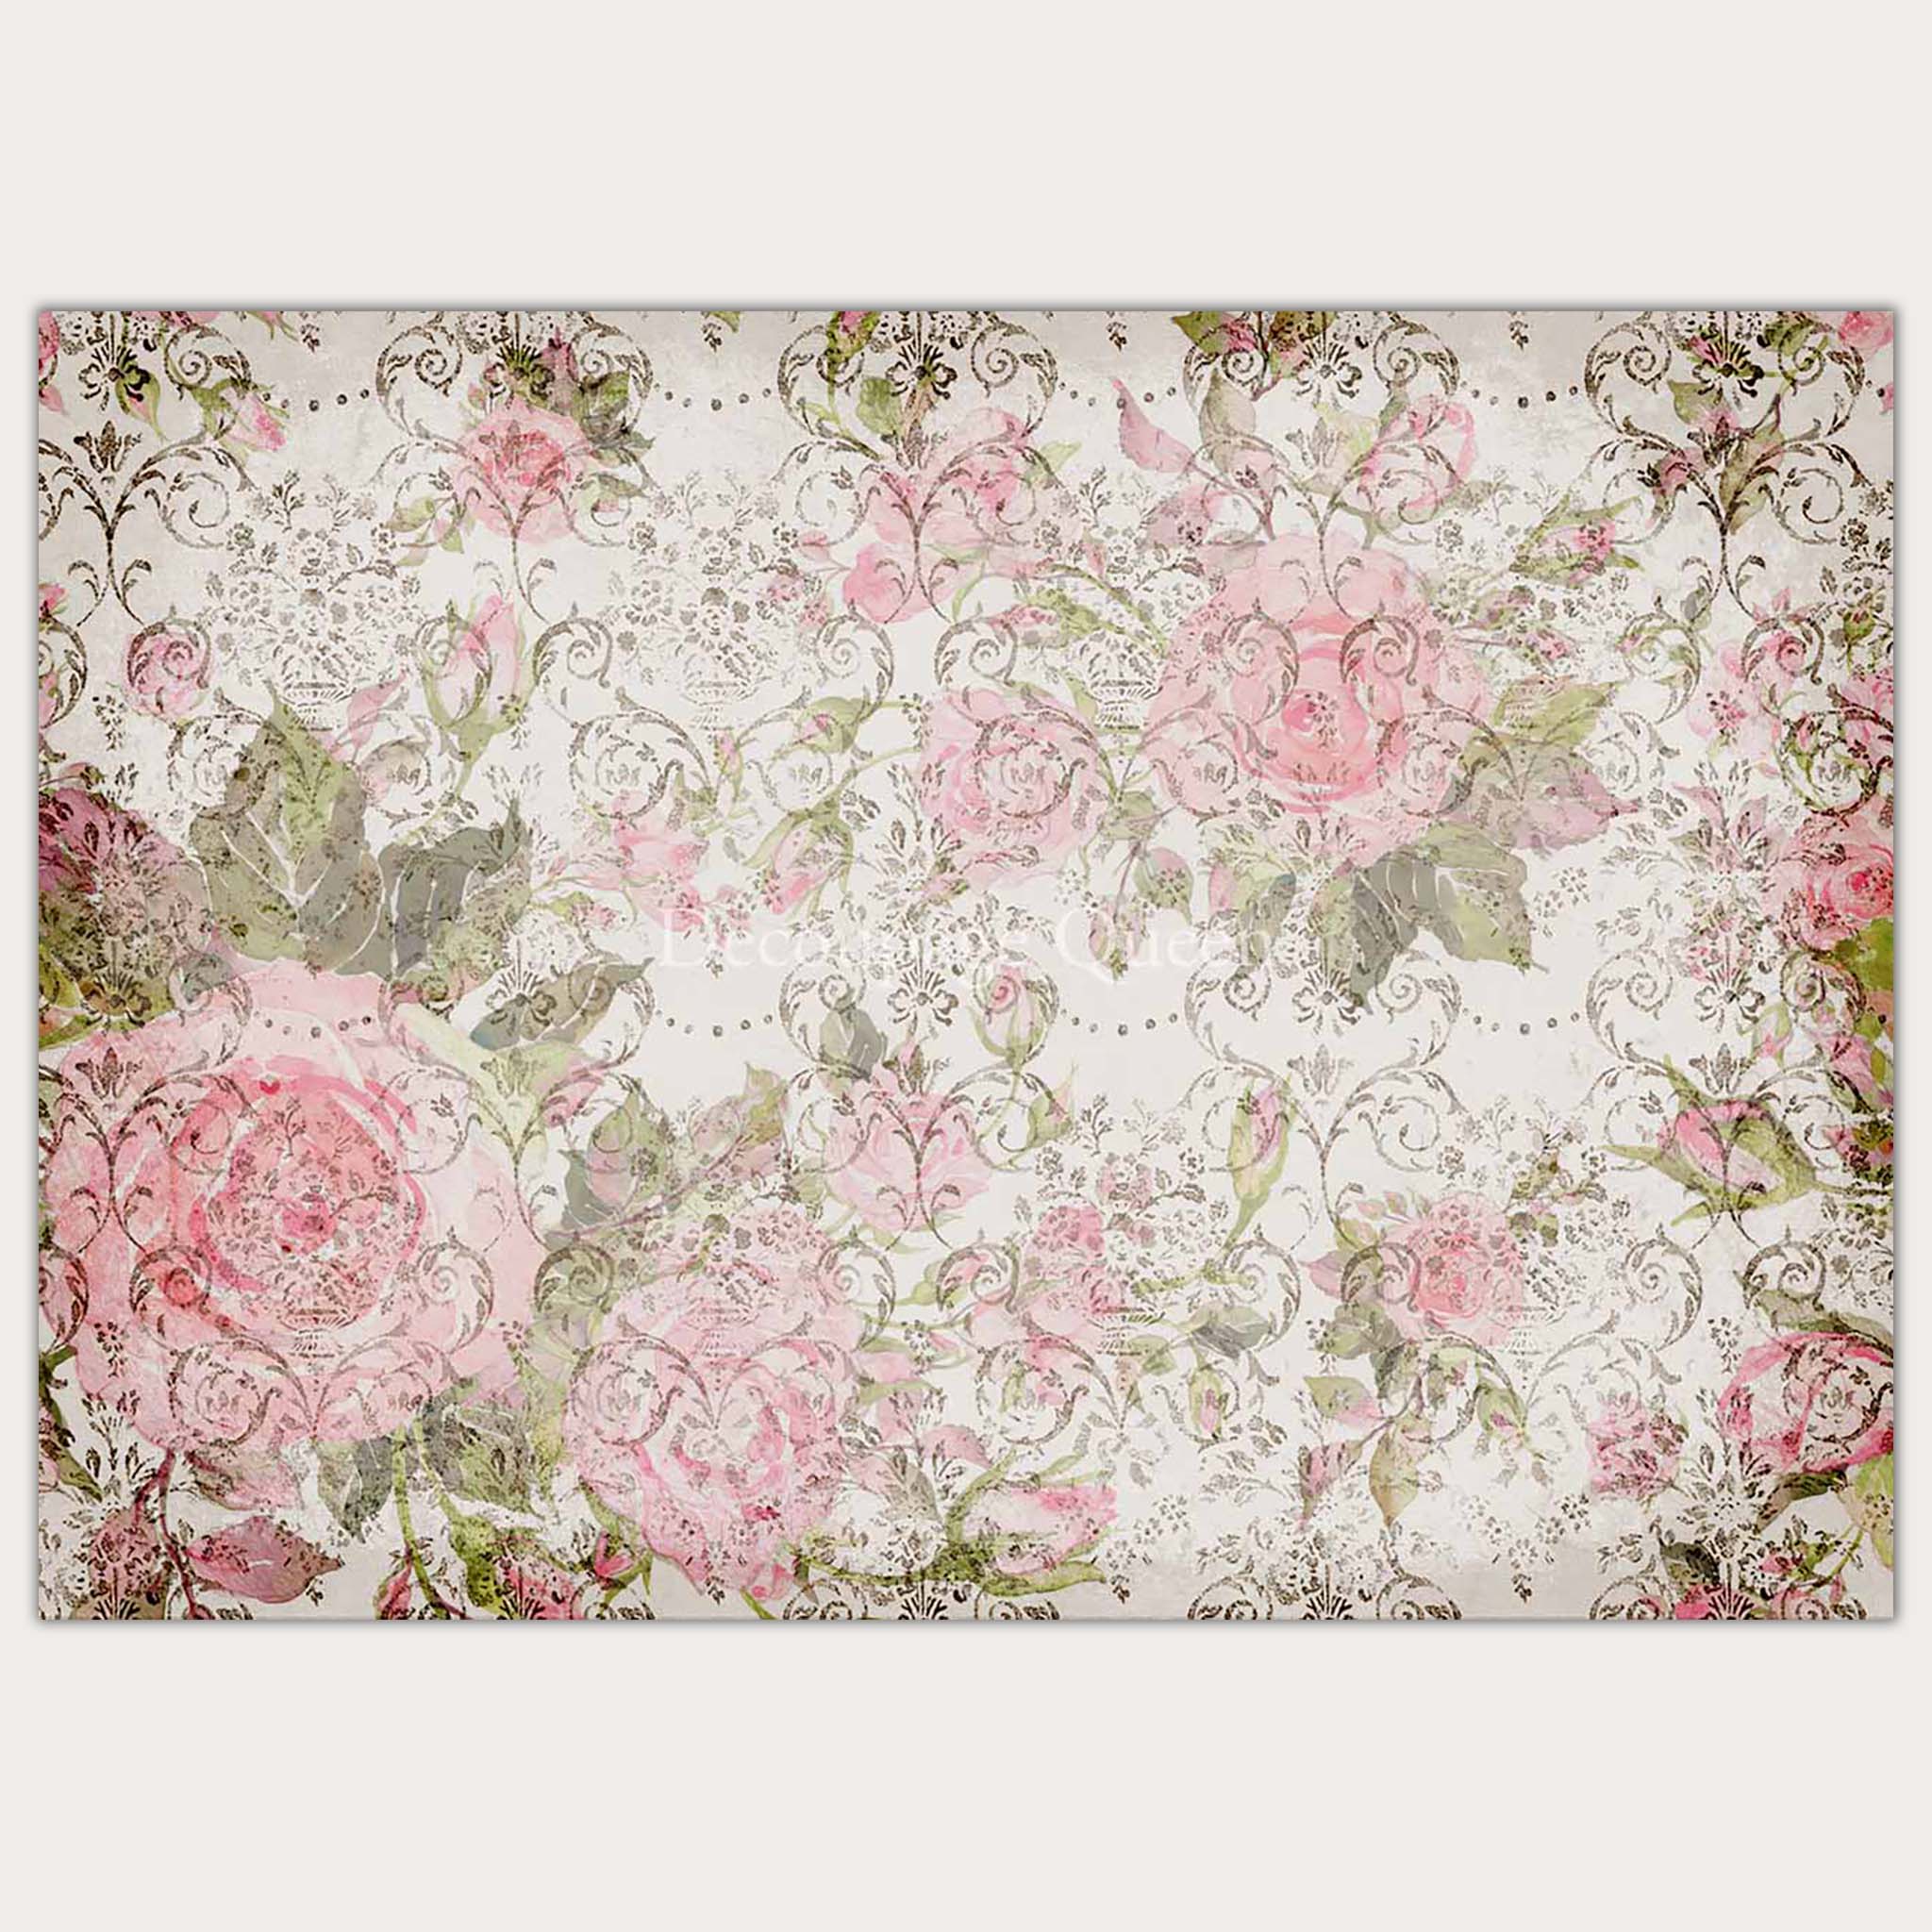 A1 rice paper design that features a repeating dark scroll pattern overlayed on large faded pink roses. White borders are on the top and bottom.